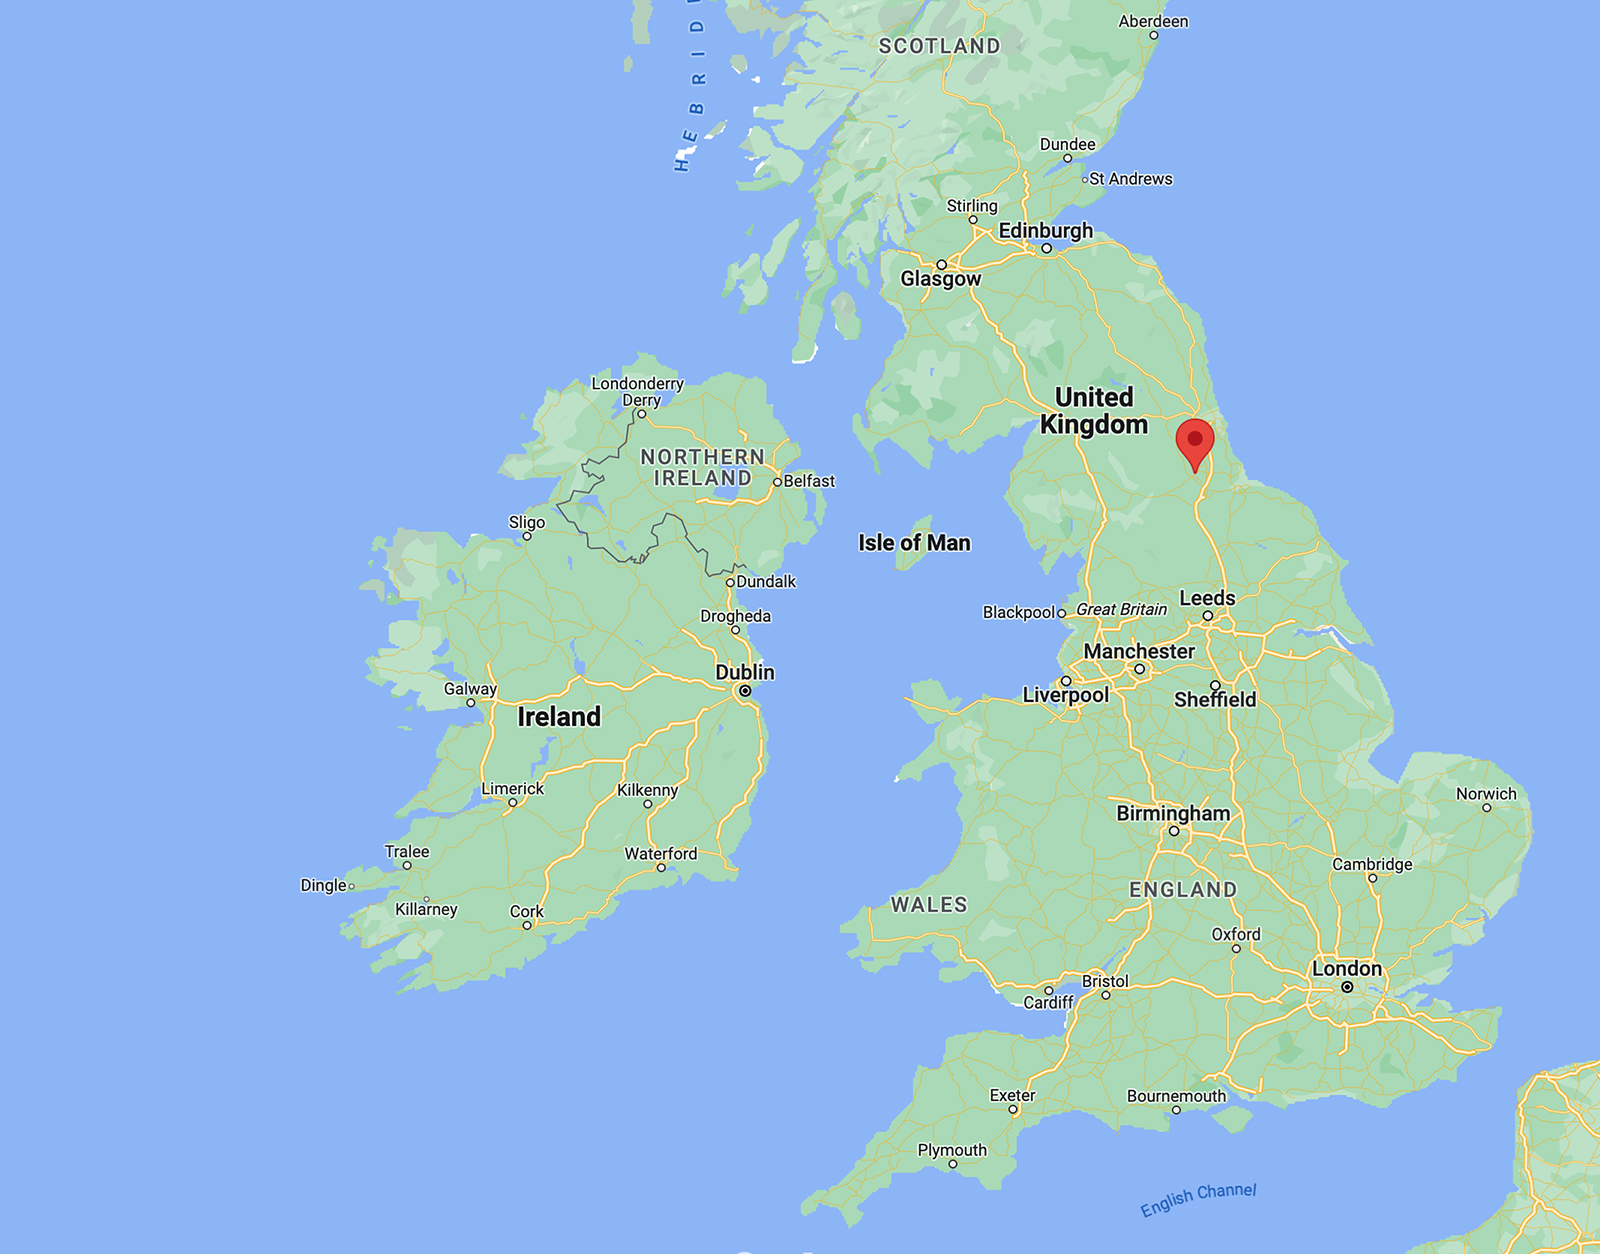 Bishop Auckland, red, in northern England. Image courtesy Google Maps